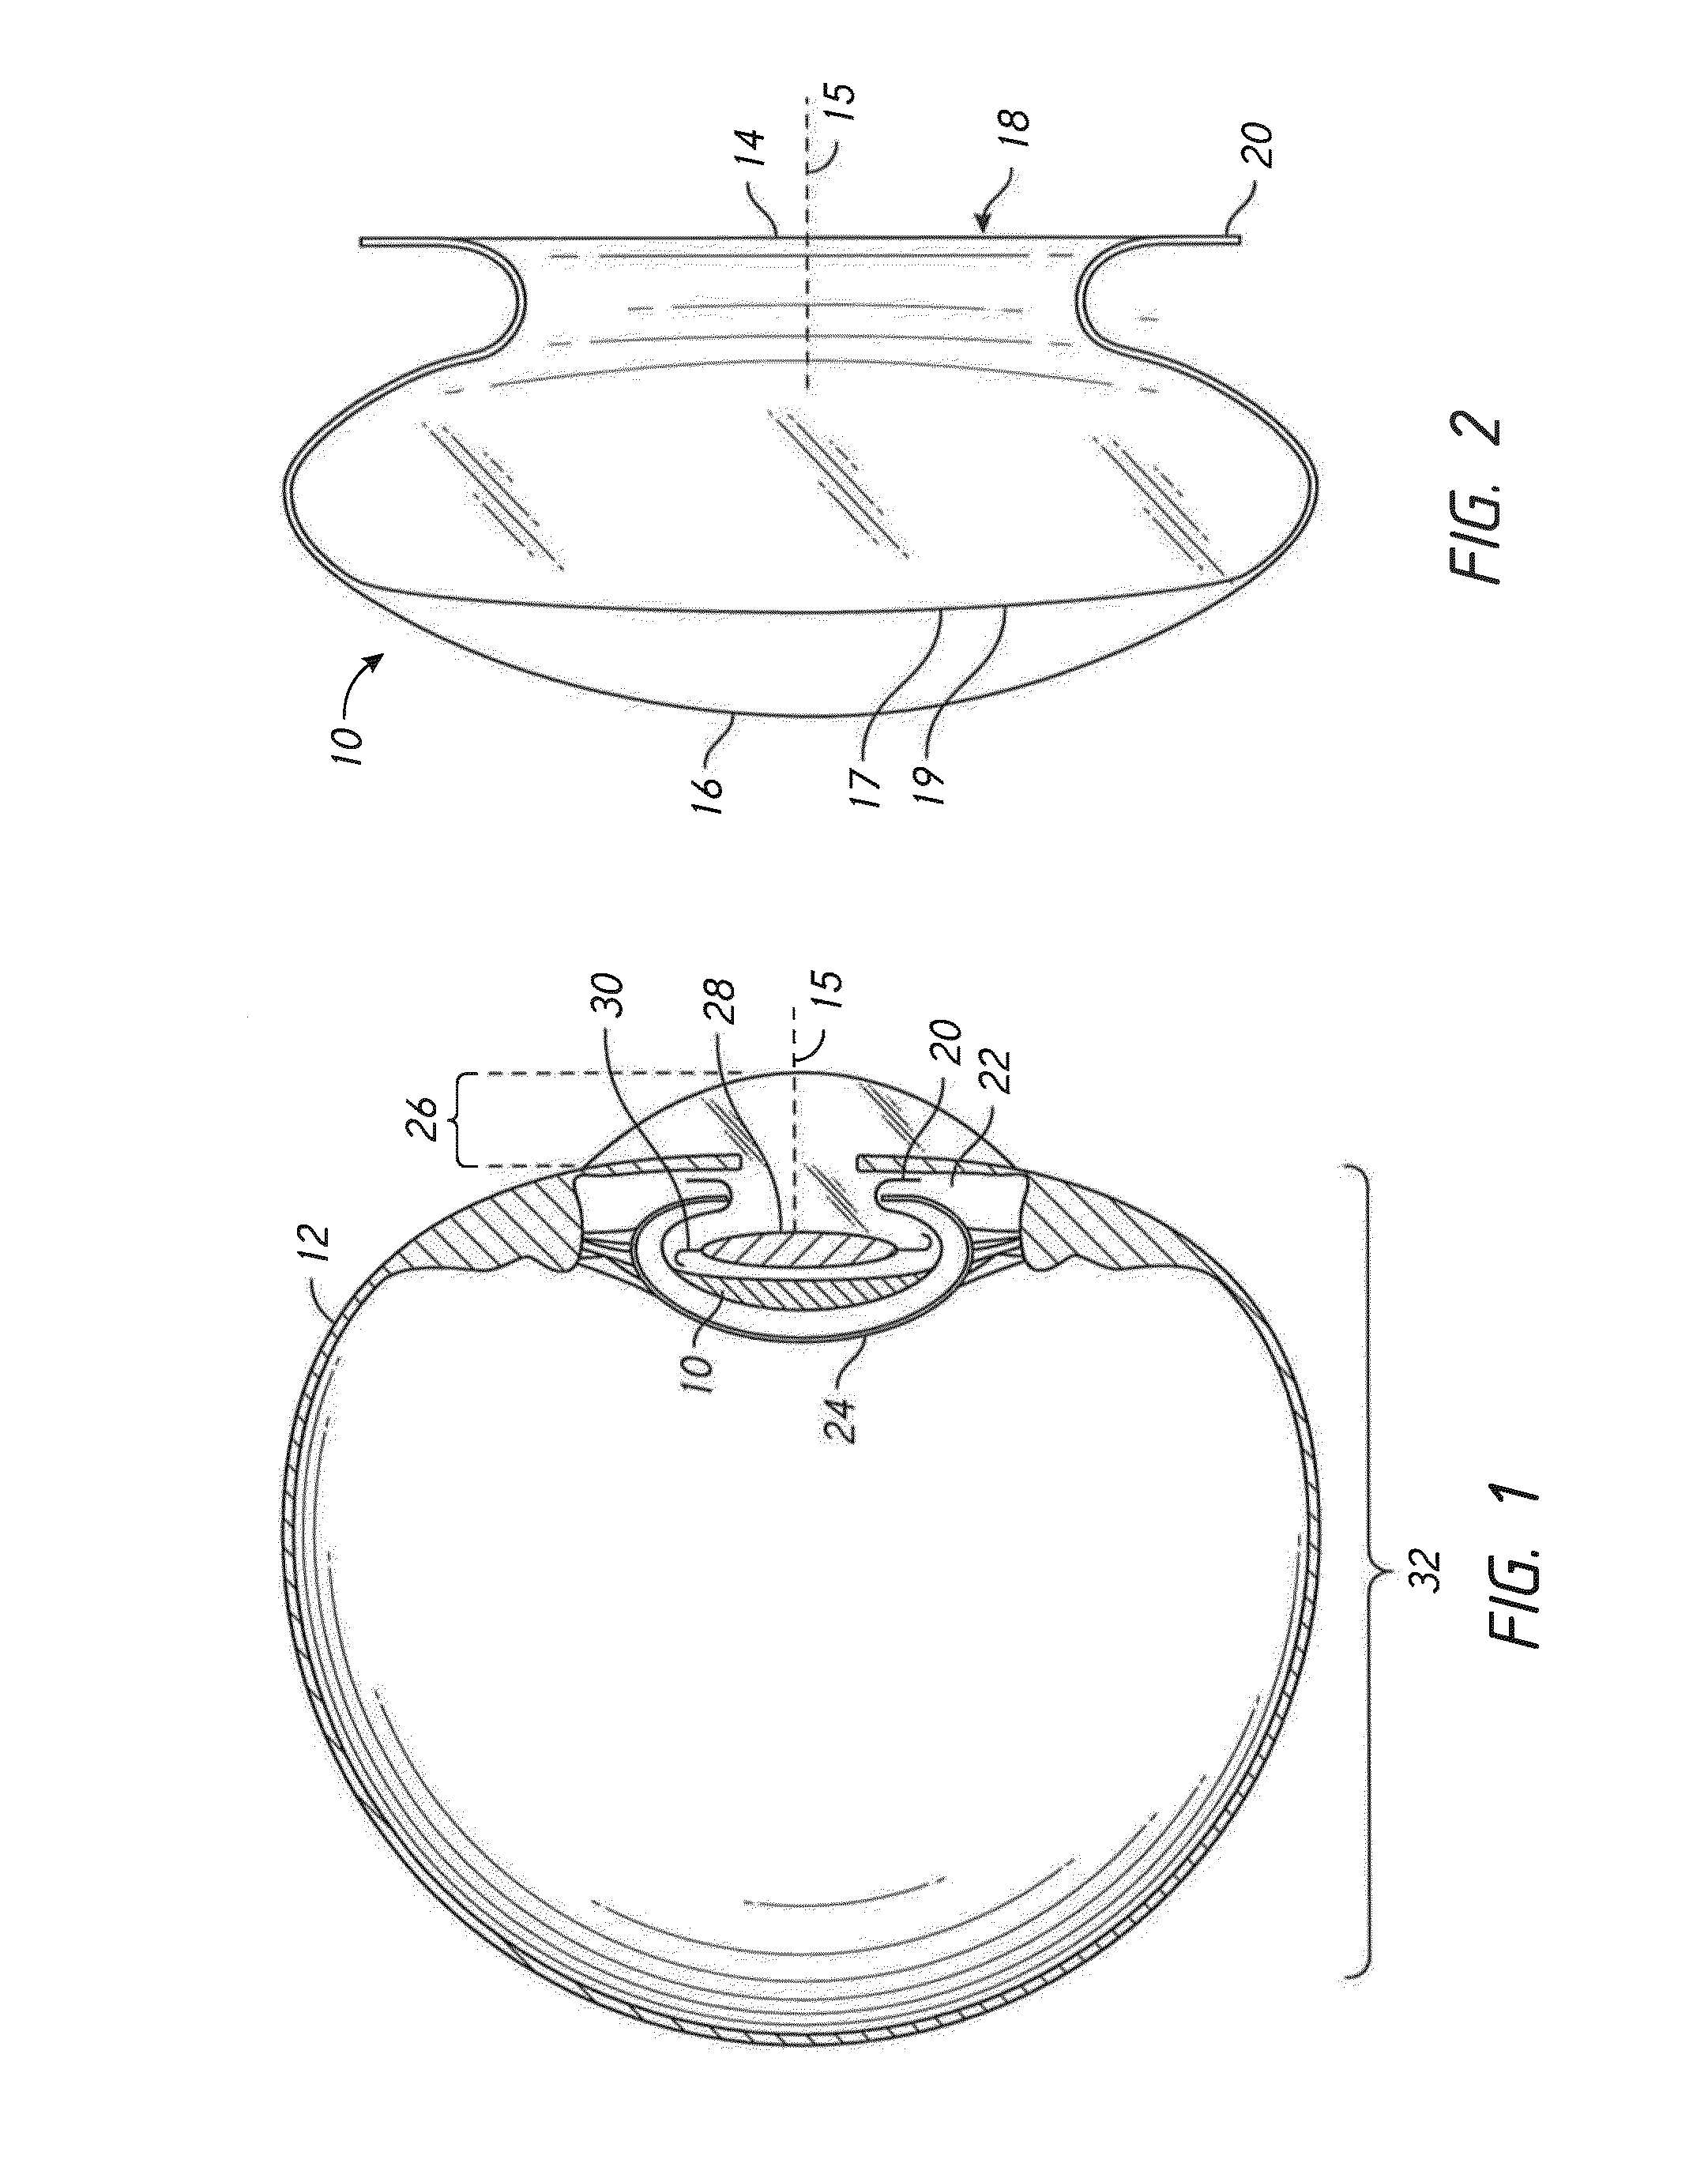 Prosthetic capsular devices, systems, and methods